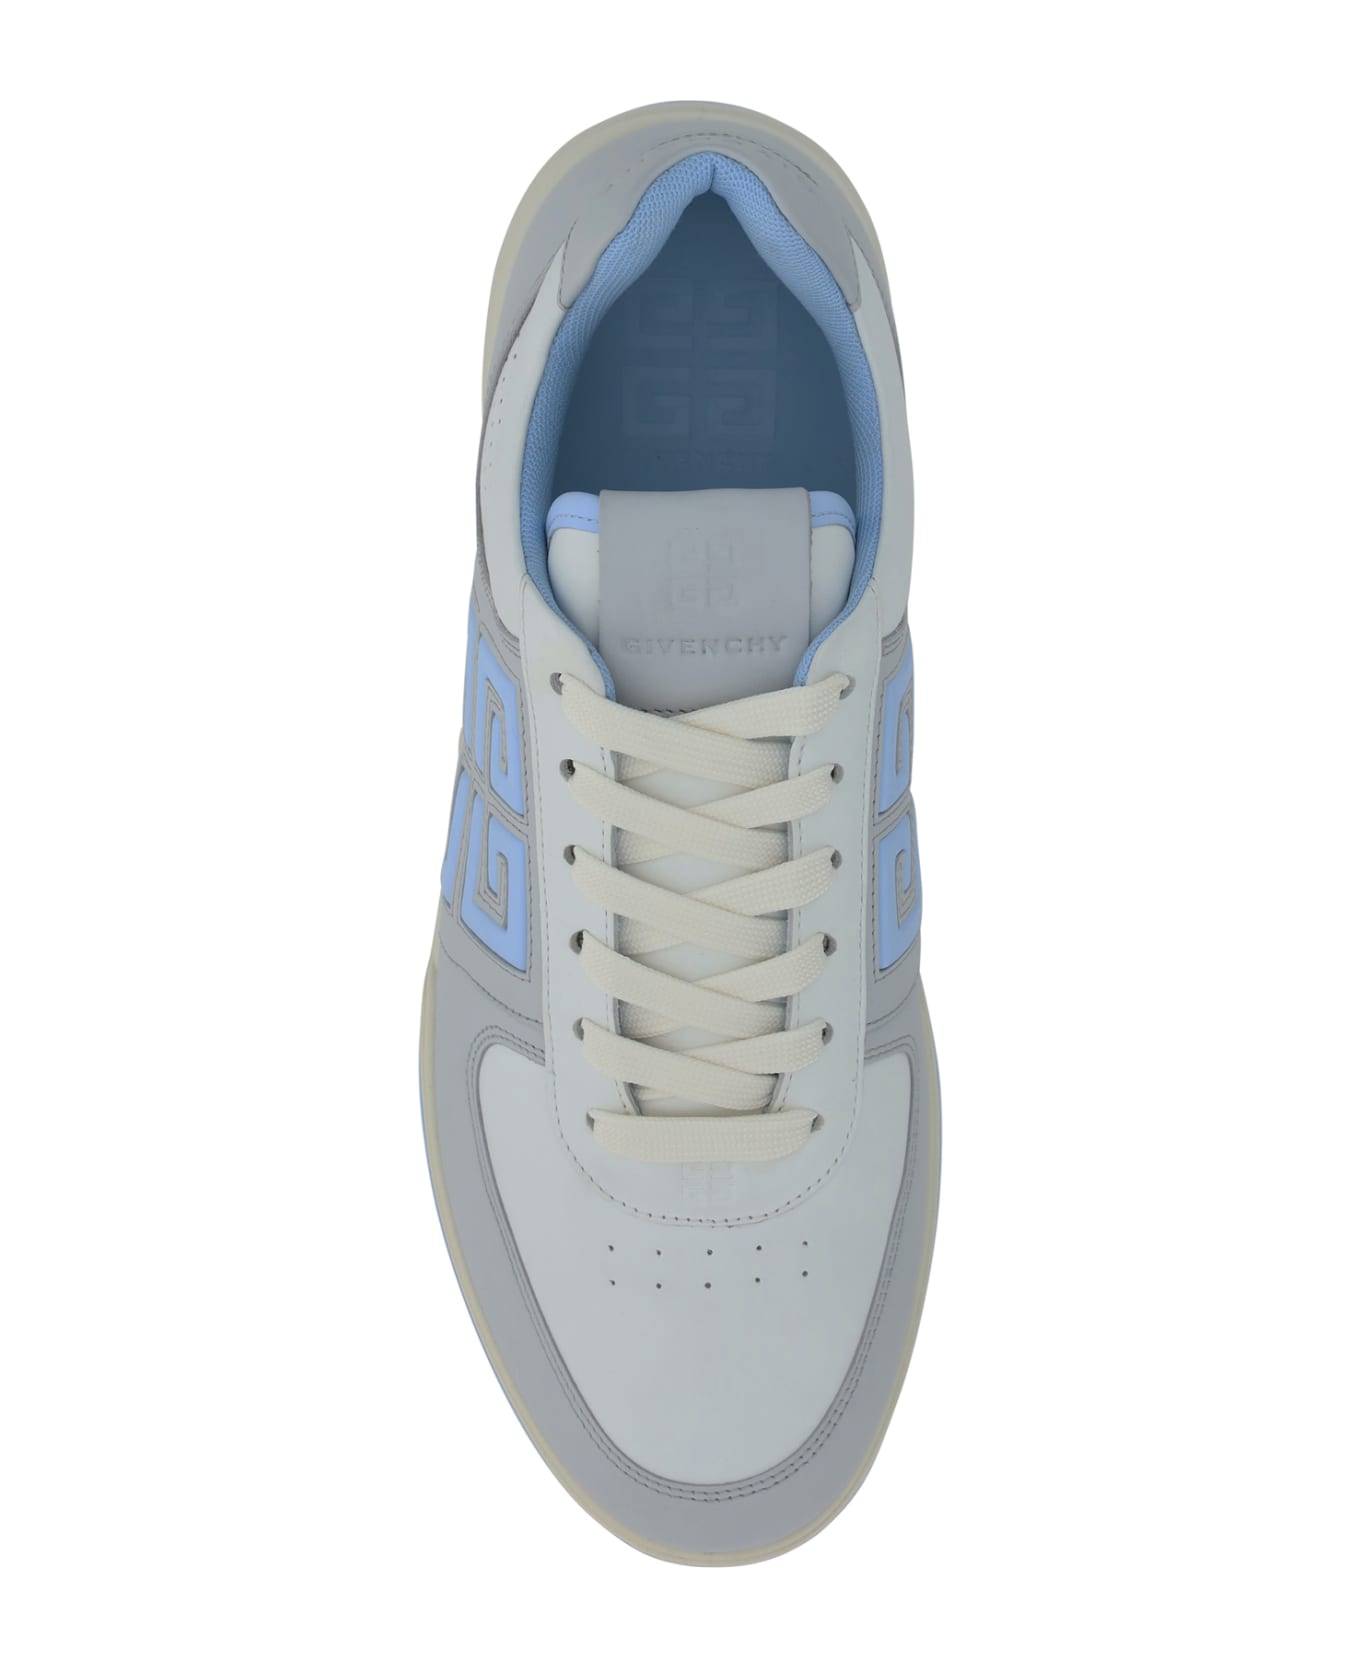 Givenchy G4 Low Top Sneakers - Grey/blue